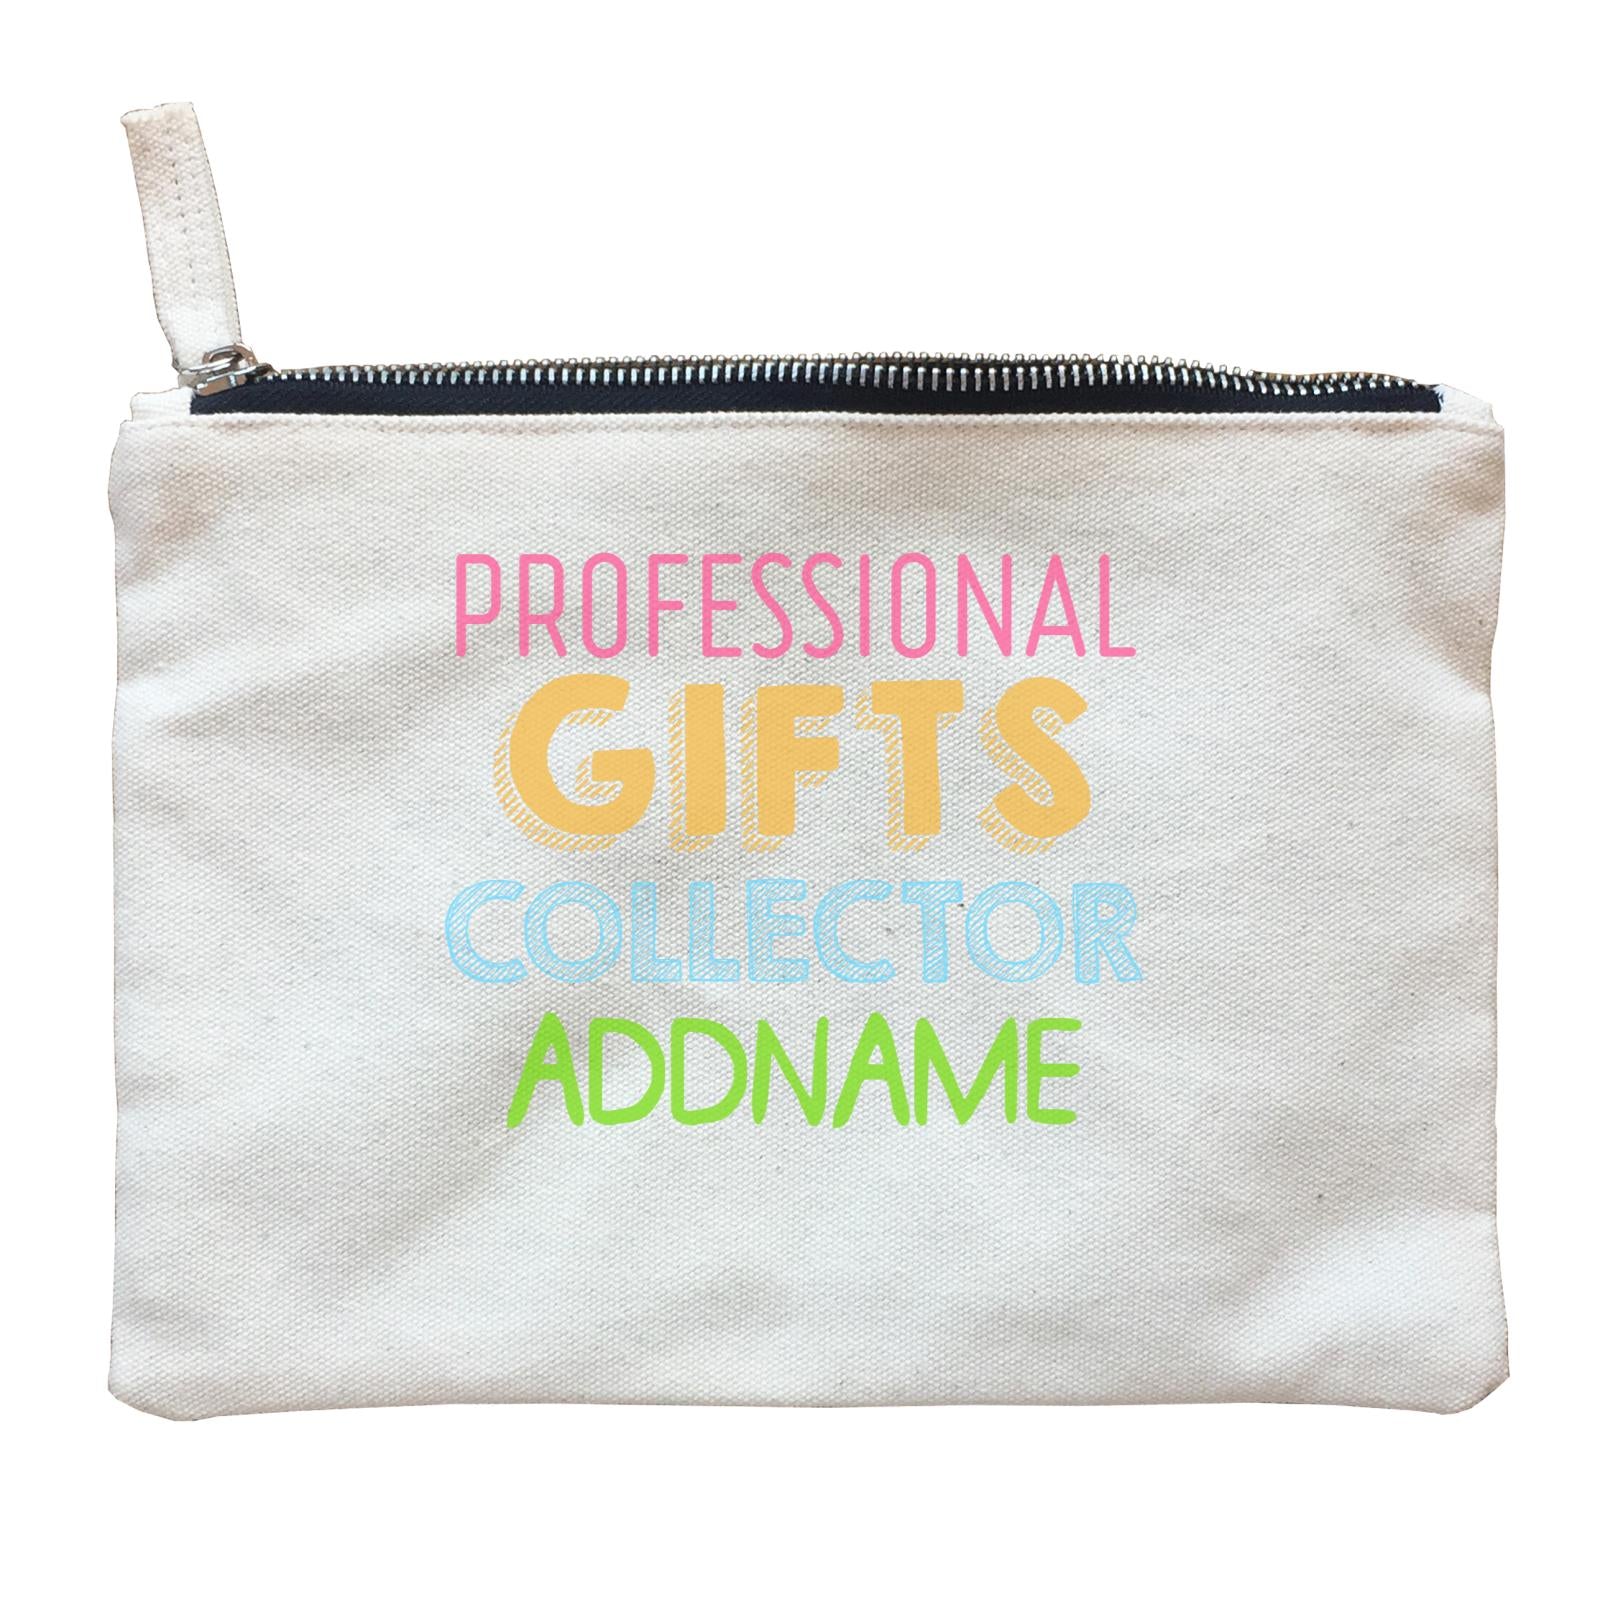 Professional Gifts Collector Addname Zipper Pouch